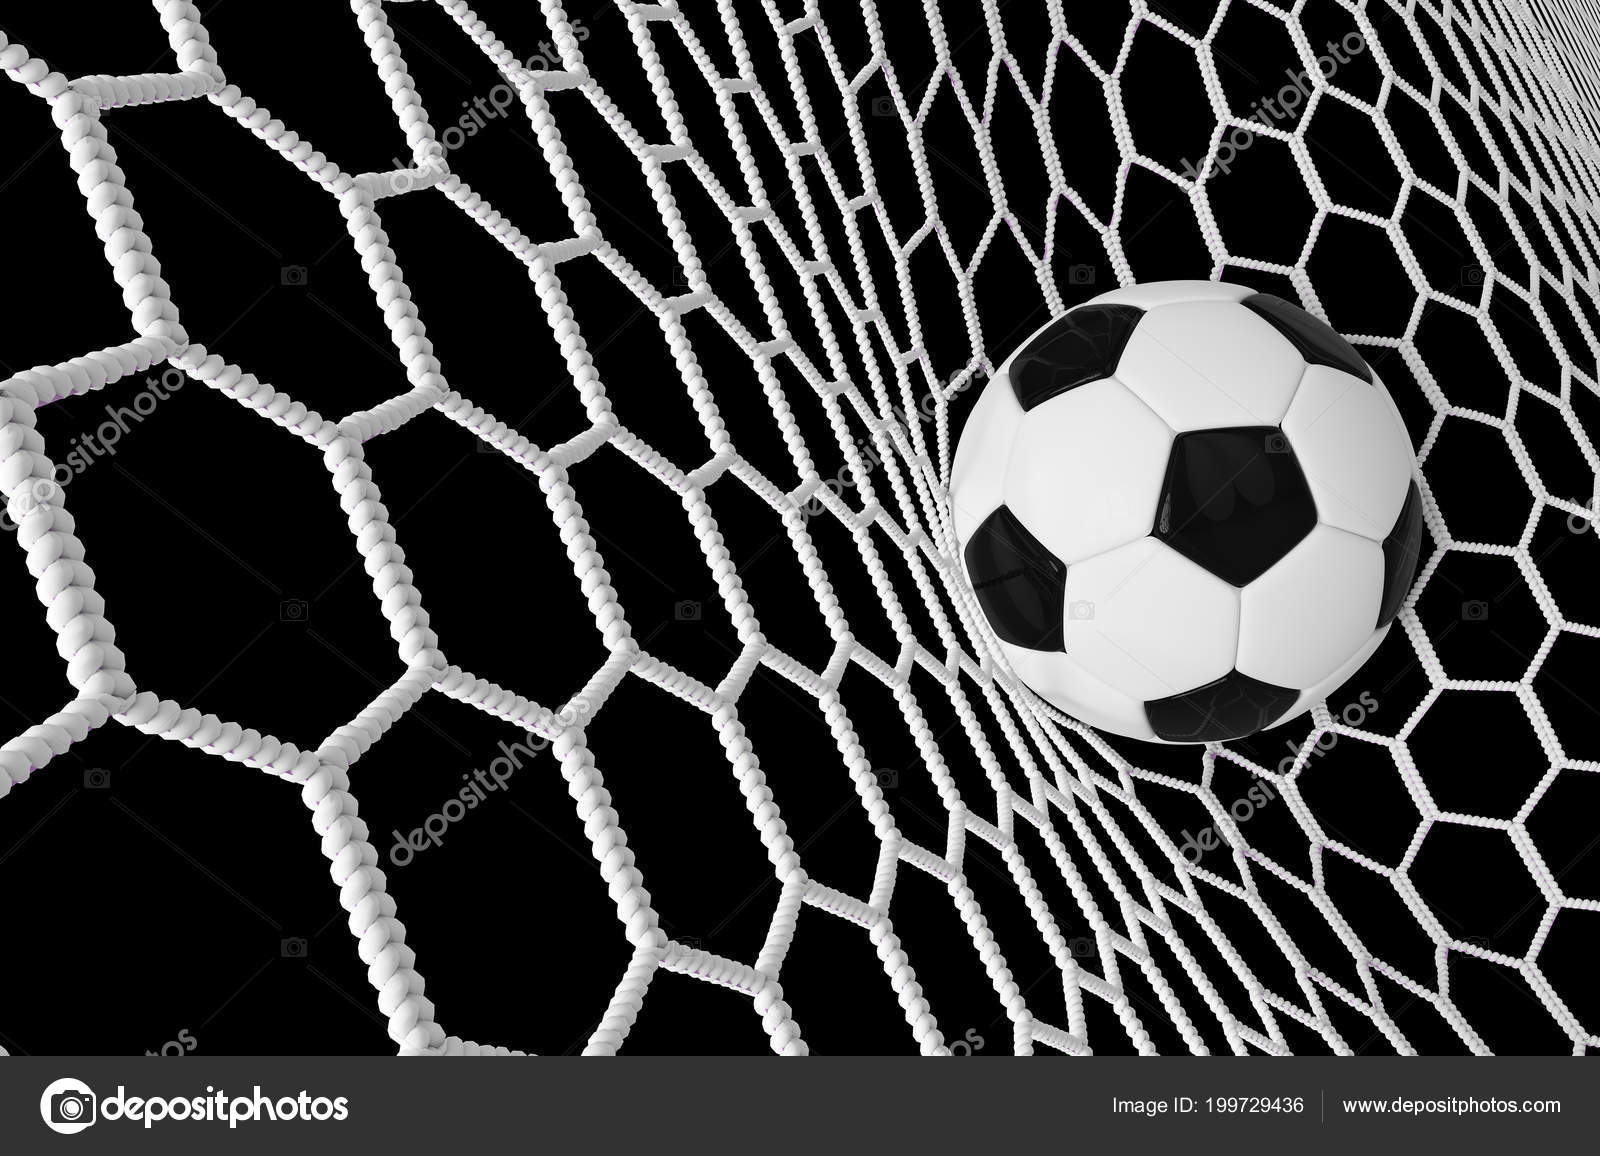 Soccer Or Football Banner With 3d Ballon Black Background Soccer Game Match Design Of Goal Moment With Realistic Ball In The Net Football Background Stock Photo Image By C Volmon Tut By